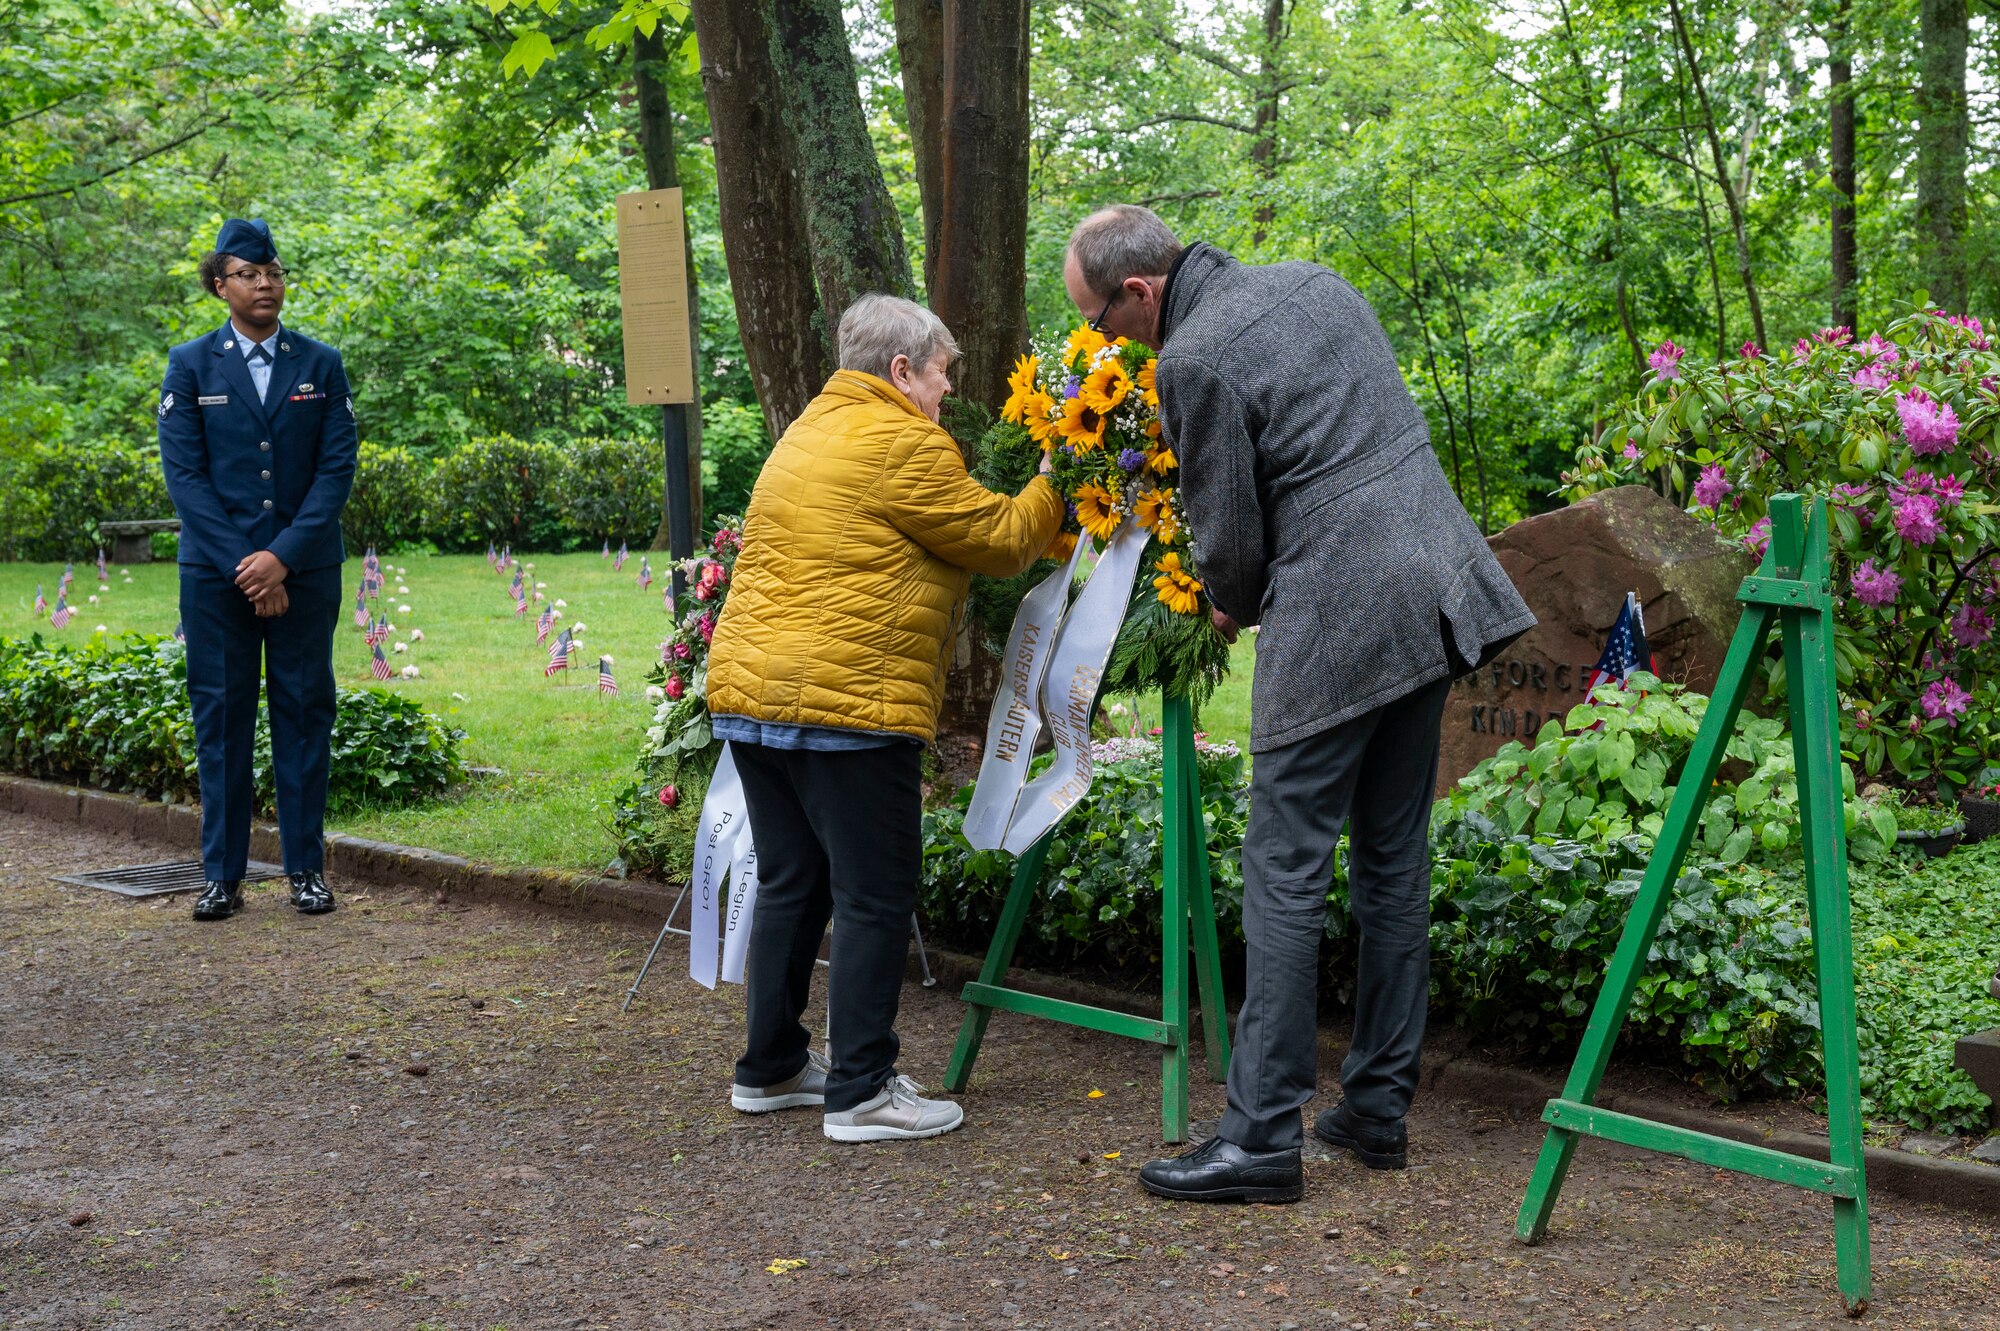 Two people place a wreath on a stand